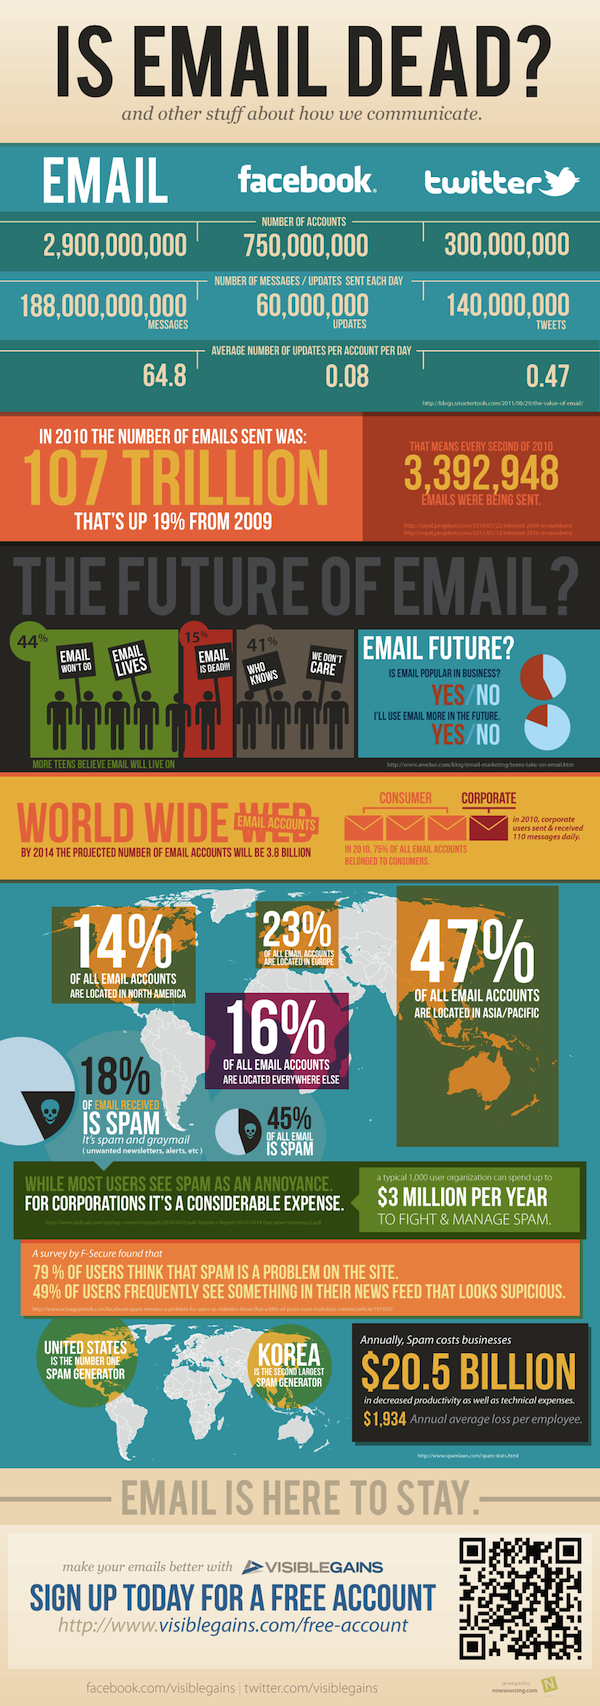 Email Spam Costs Businesses $20.5 Billion a Year [INFOGRAPHIC]